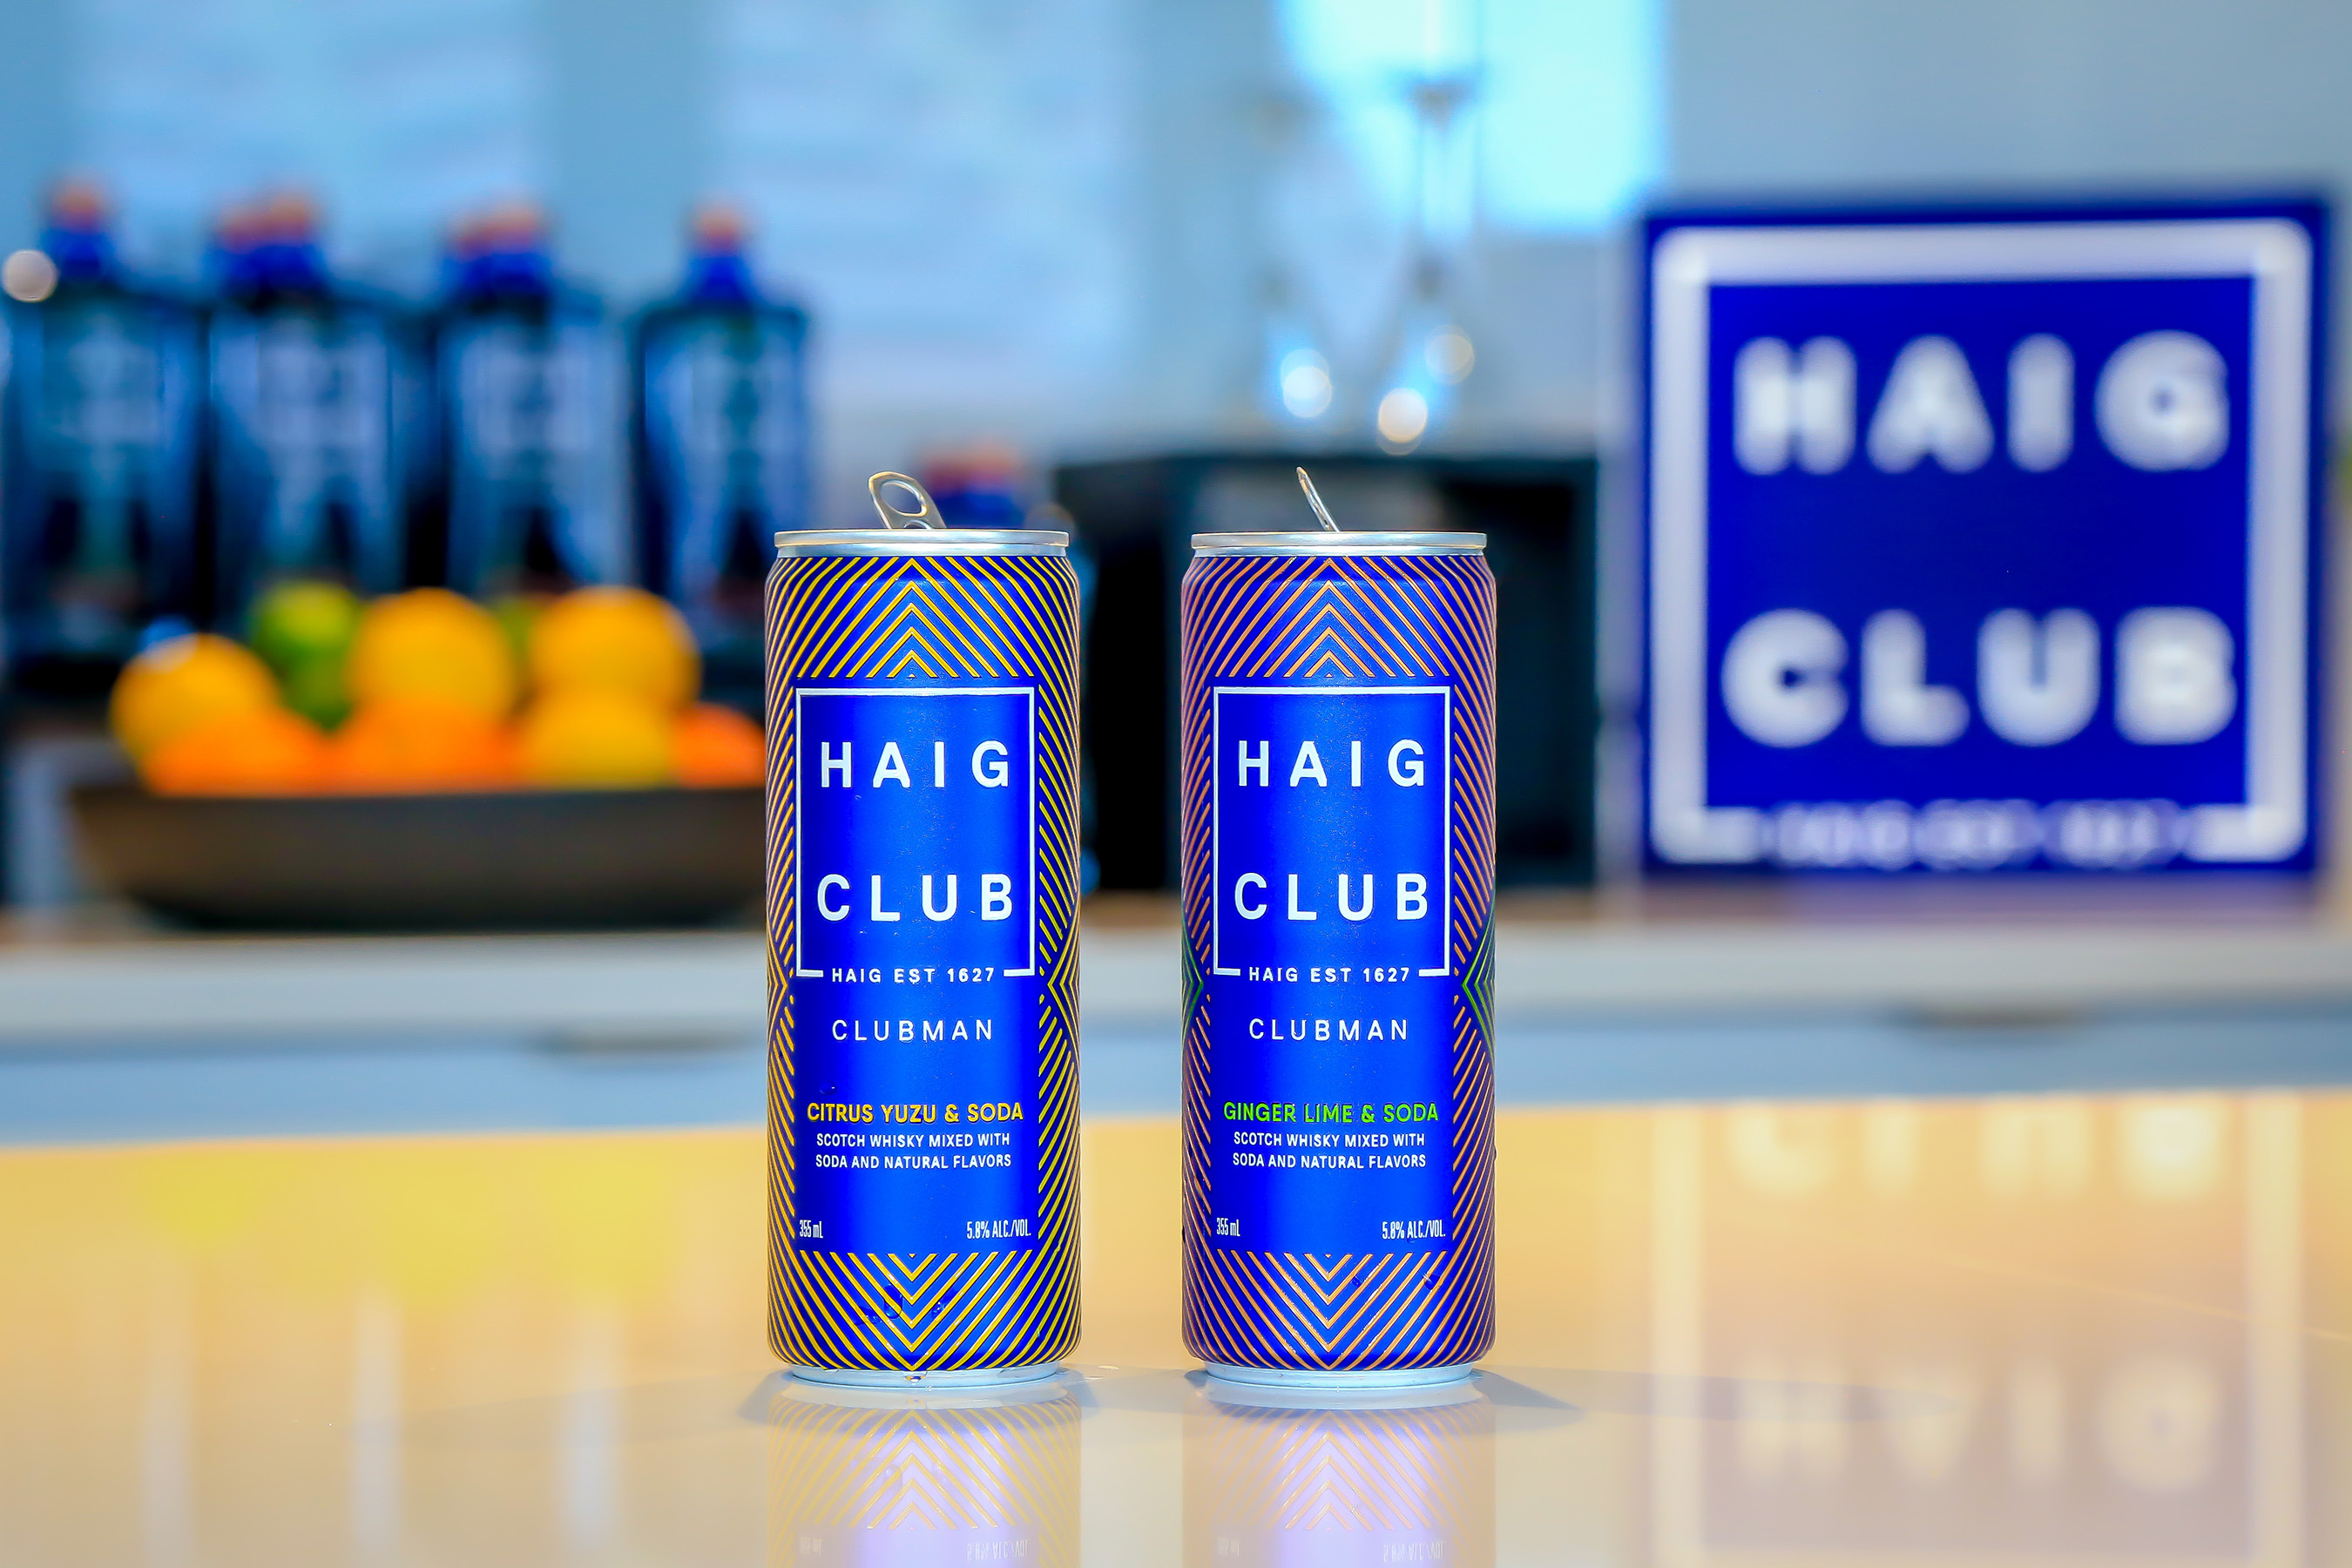 Available in Ginger Lime & Soda and Citrus Yuzu & Soda, the liquids combine elevated, tropical ingredients with the light, smooth taste of Haig Club Clubman, the perfect bright and bold base for these effervescent canned cocktails.